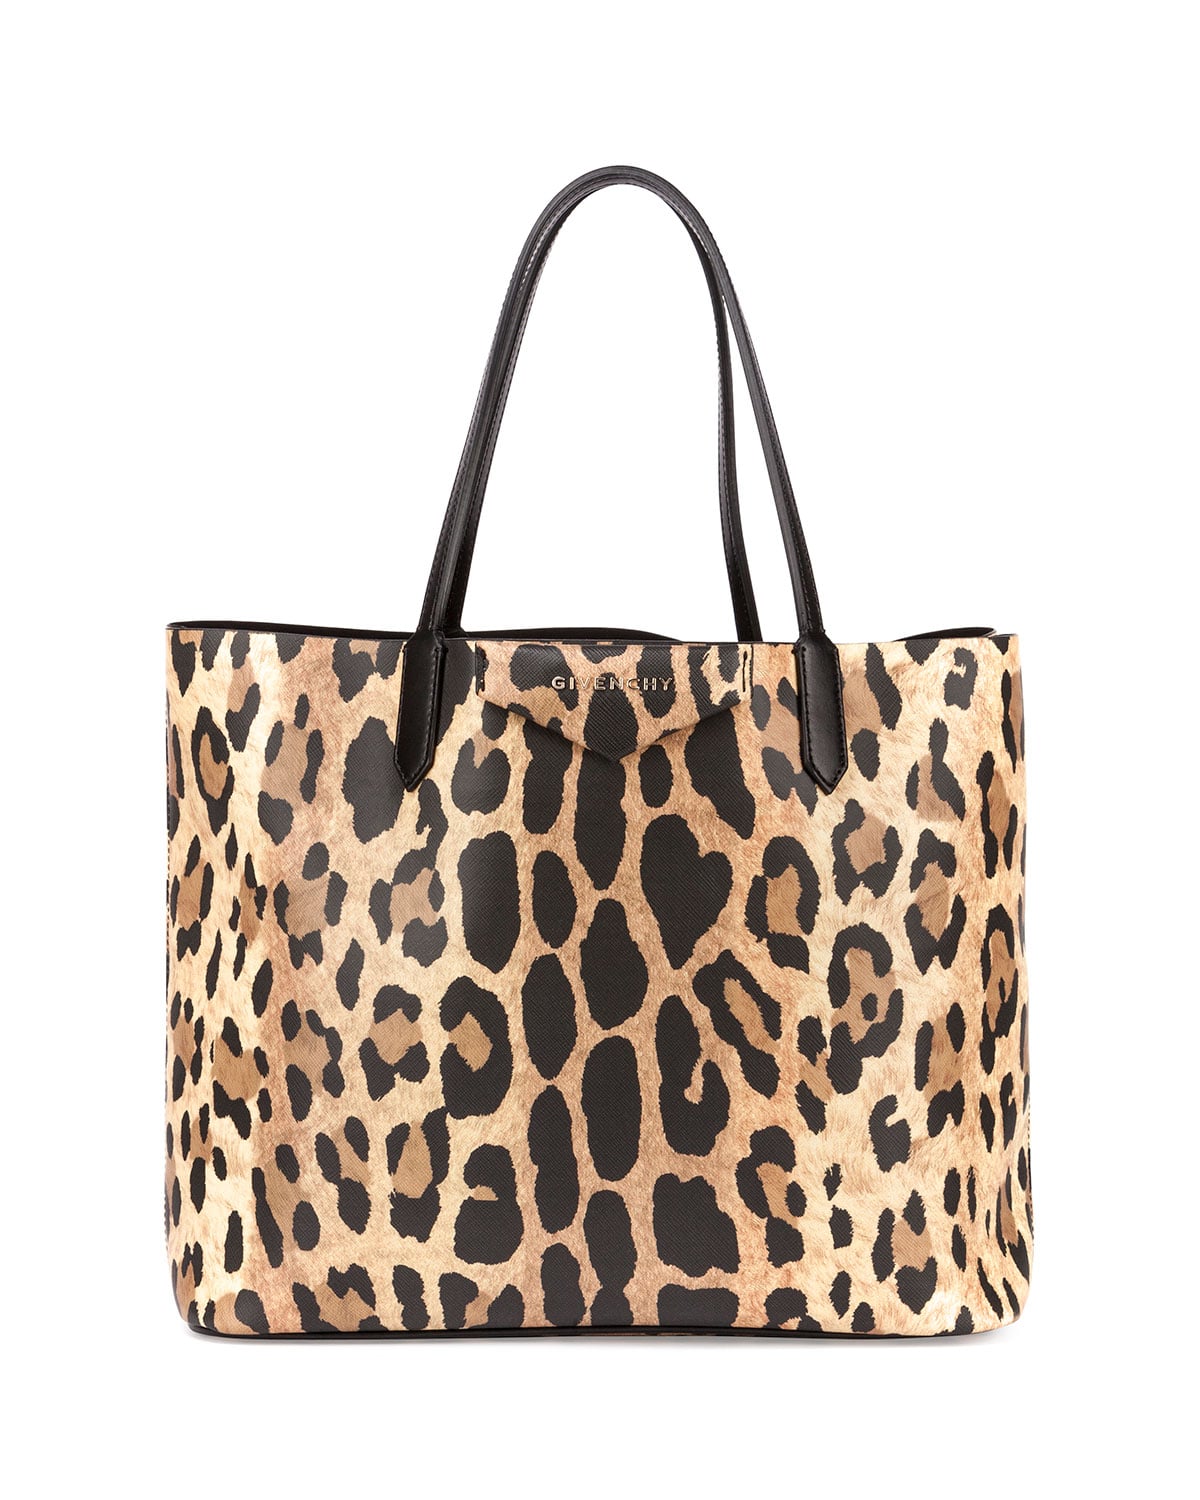 Givenchy Pre-Fall 2015 Bag Collection featuring Leopard Prints | Spotted Fashion